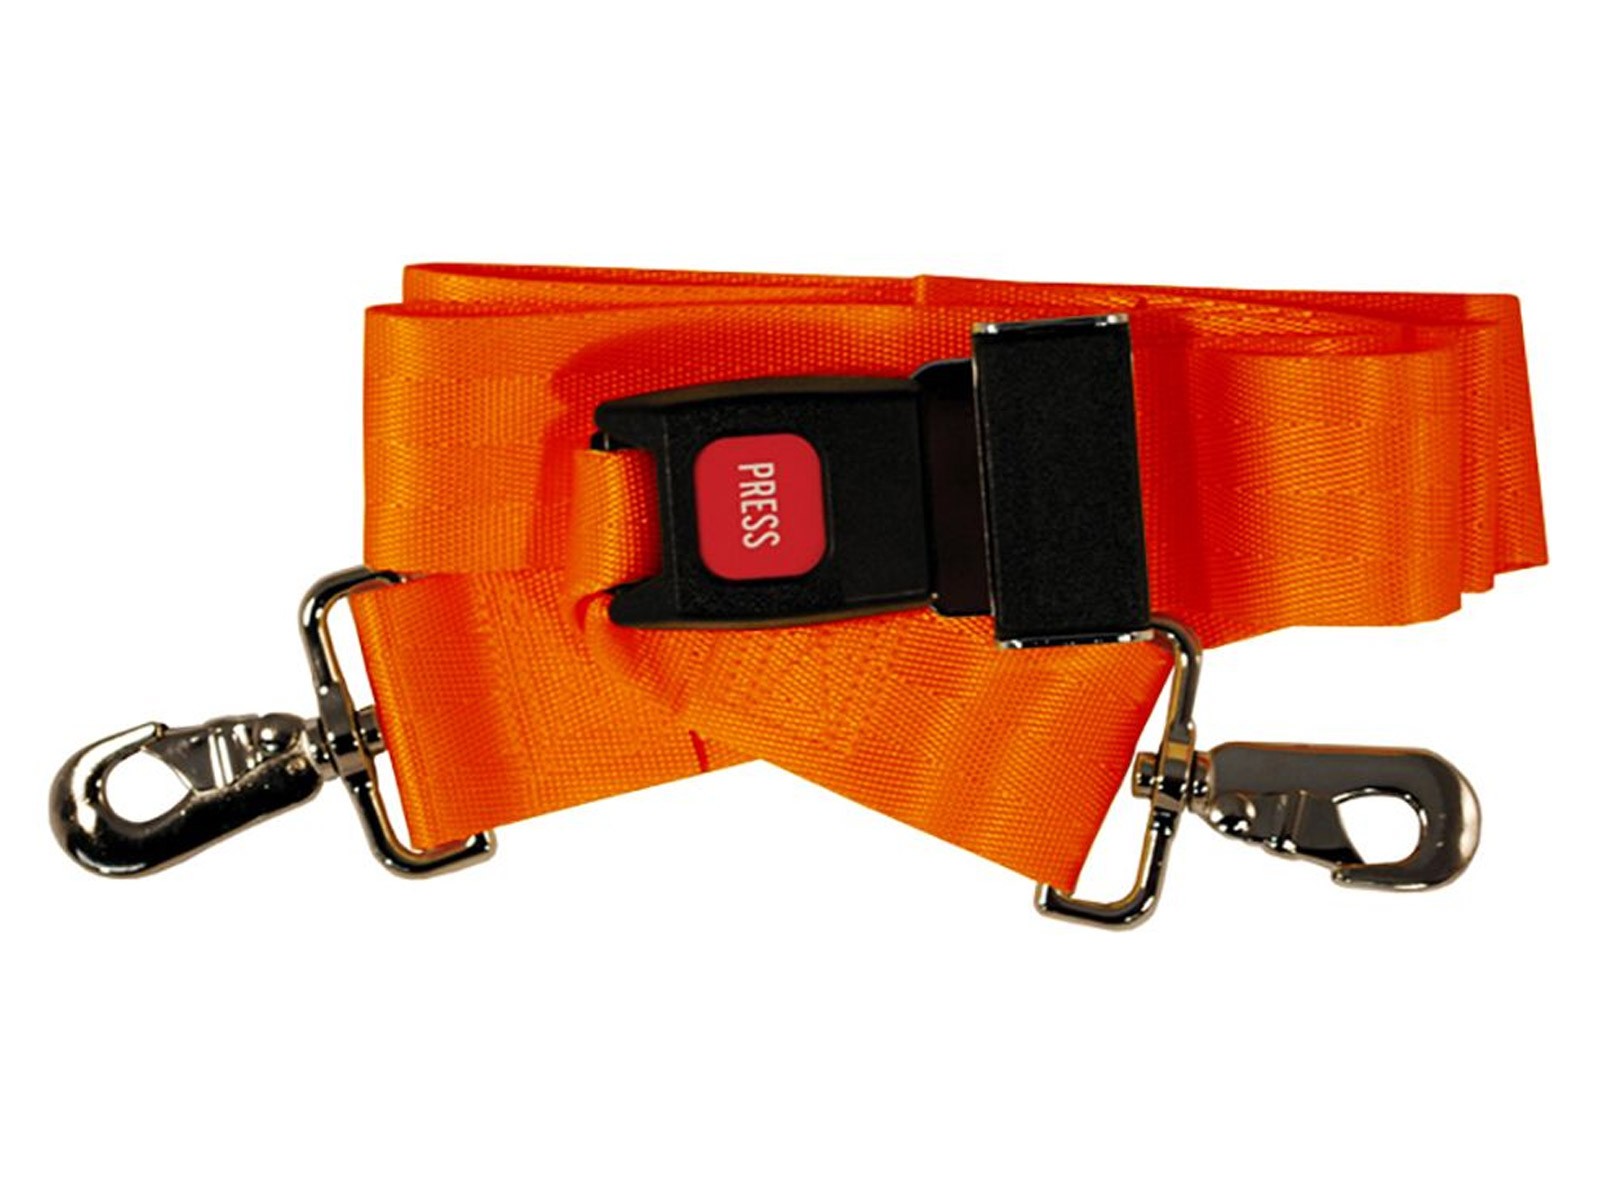 Buy Restraint Straps - Ensure the stability of a patient before movement